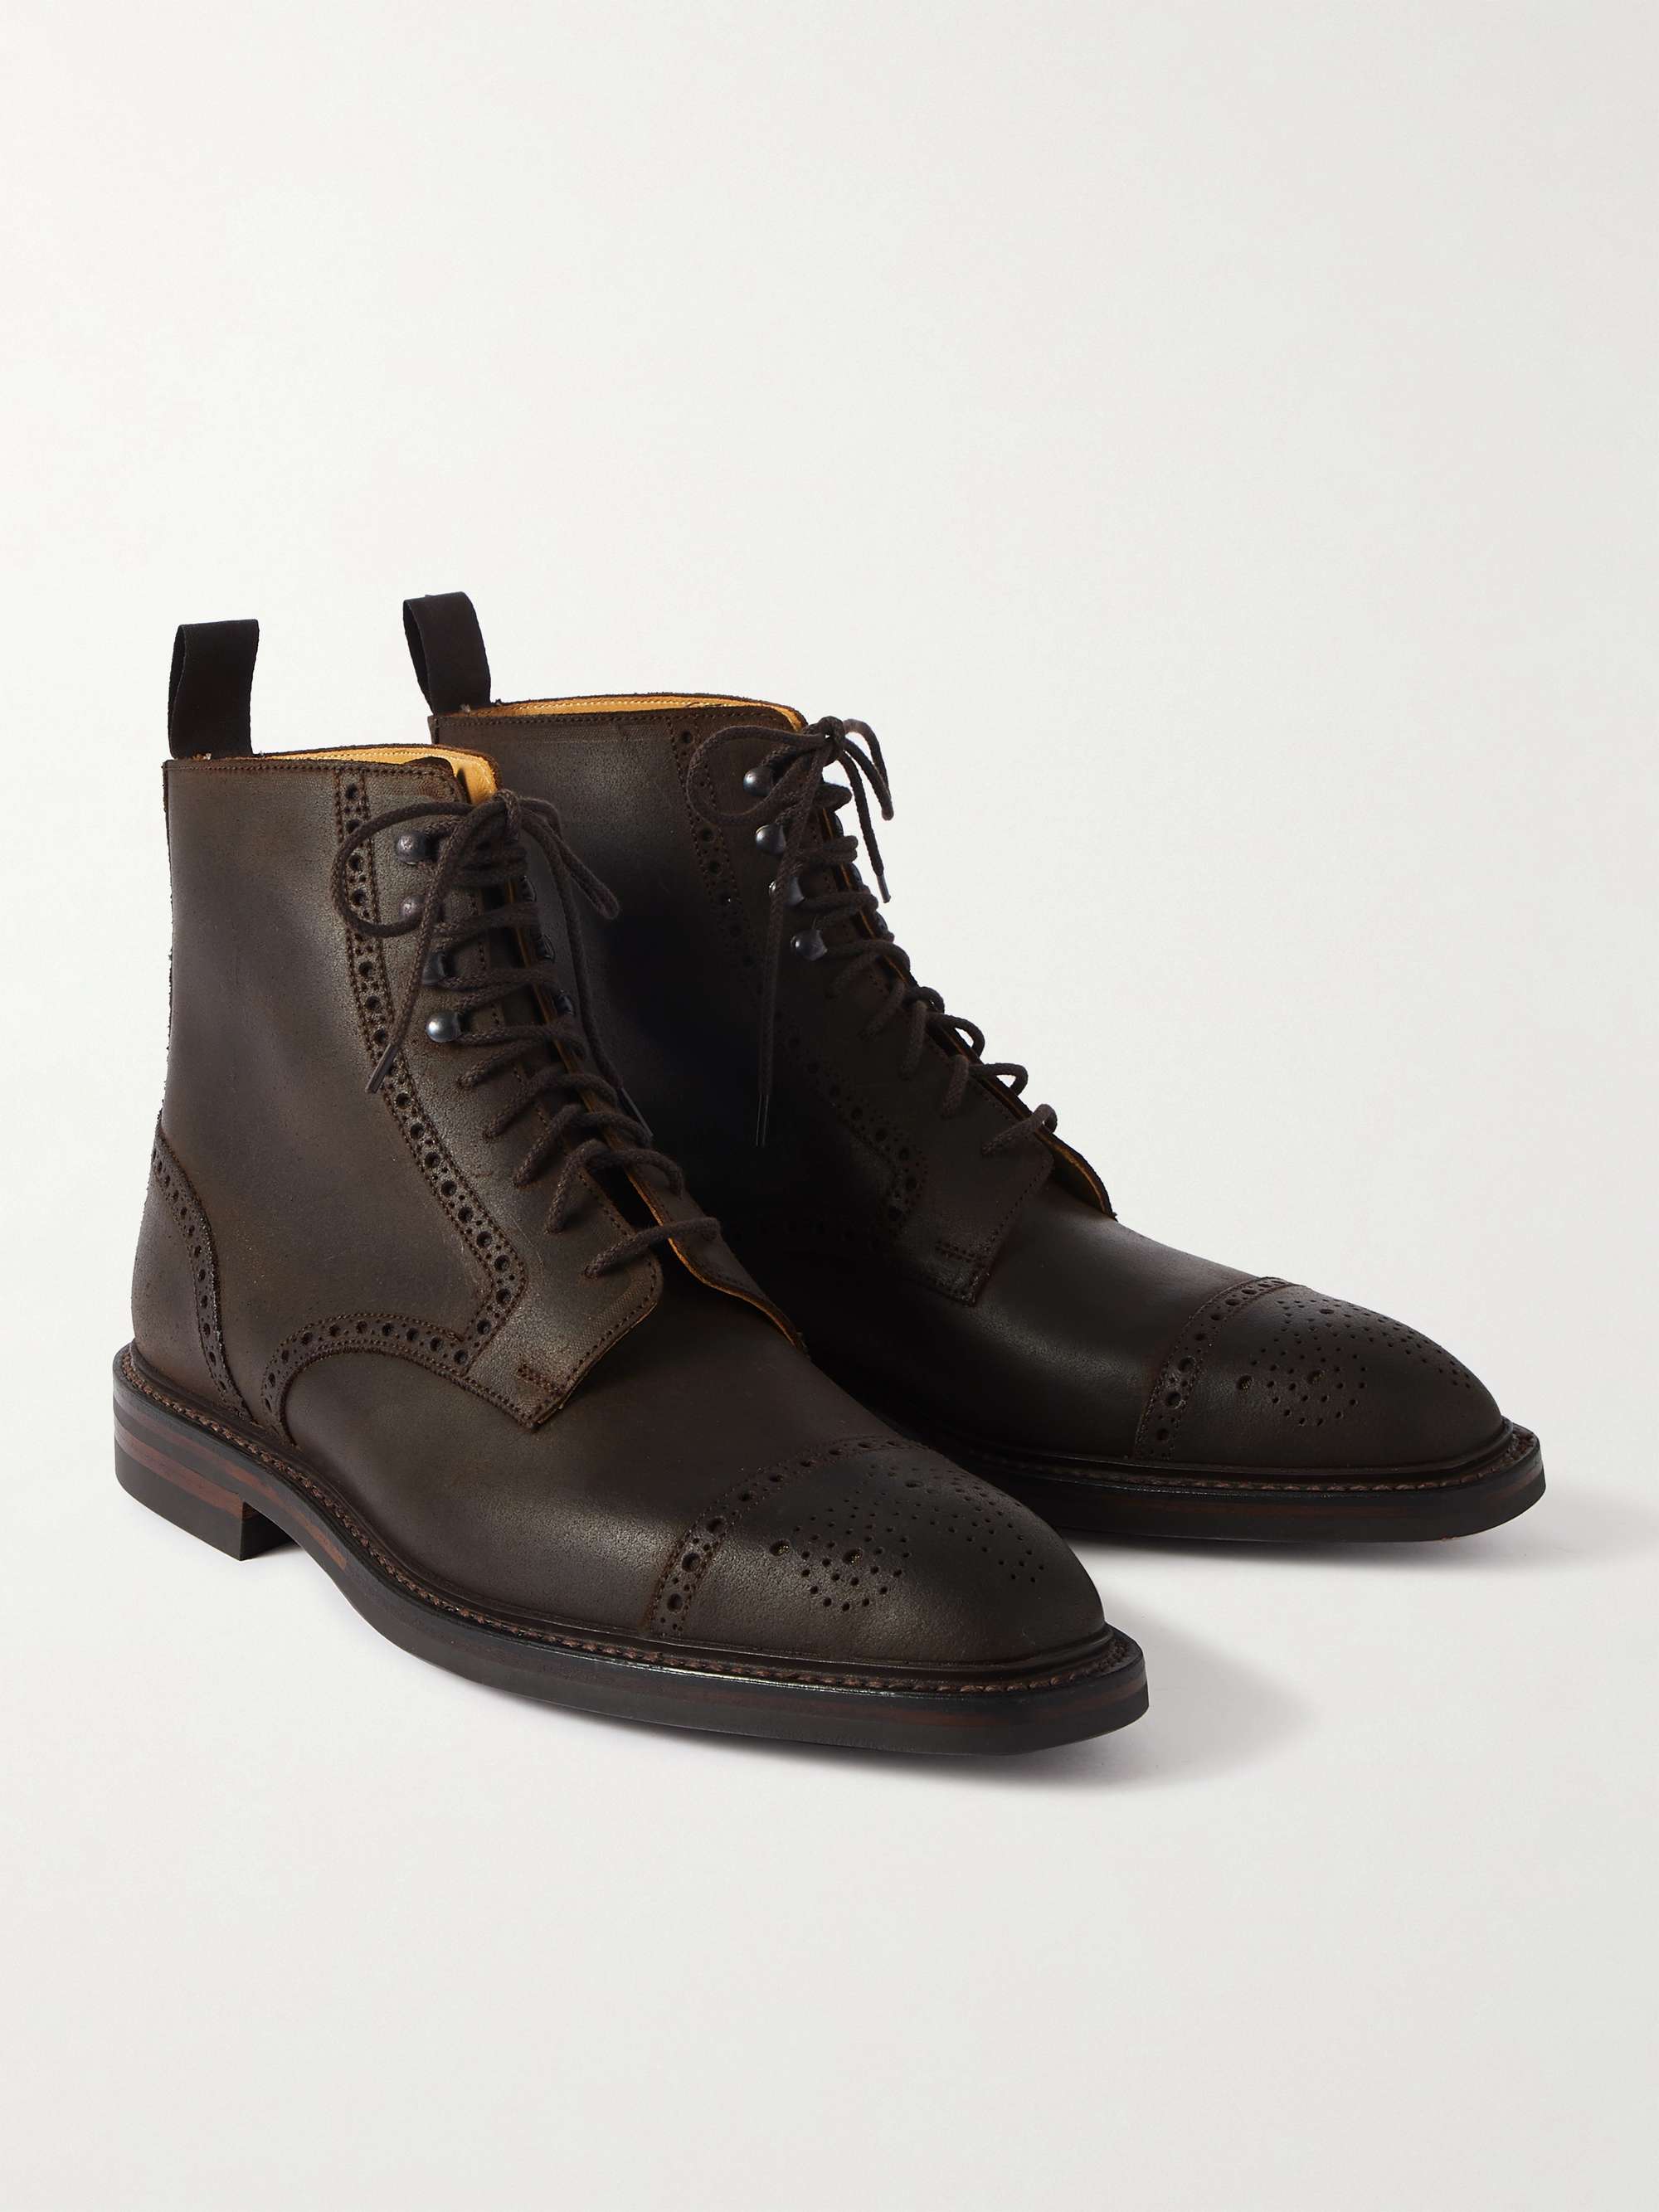 GEORGE CLEVERLEY Toby Suede Brogue Boots